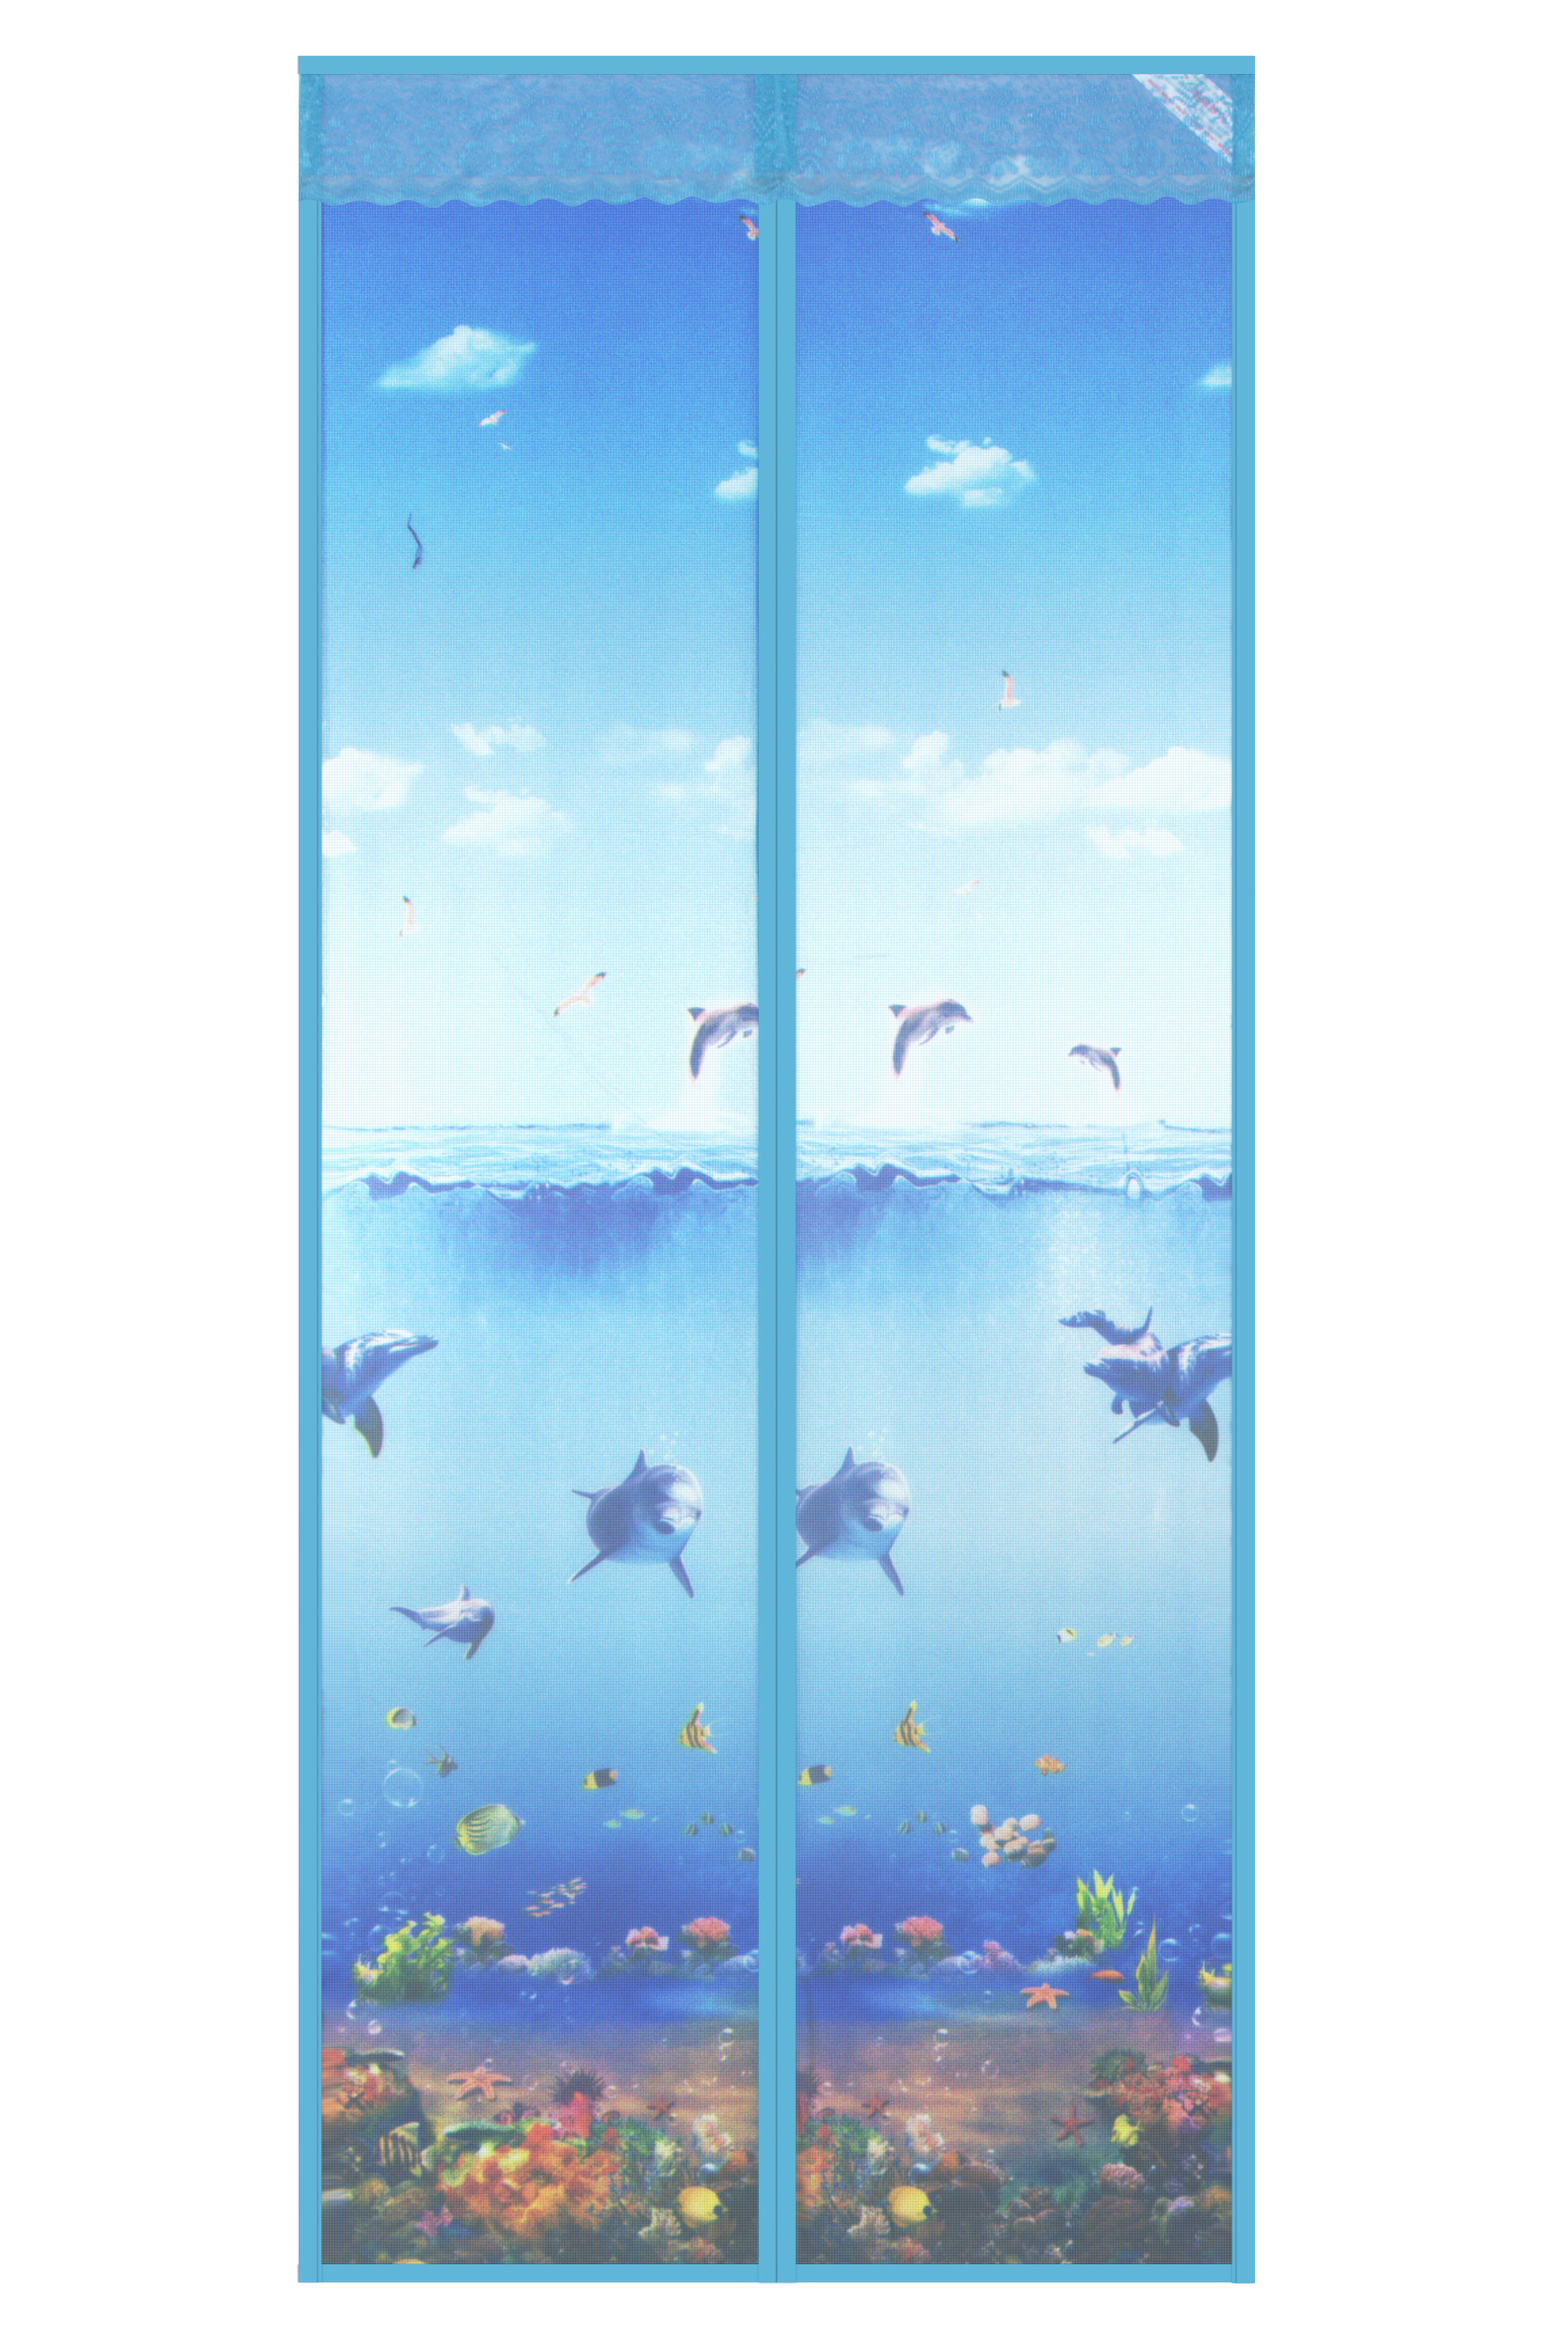 New magnetic soft curtain in 2020-Underwater world magnetic soft curtain-blue